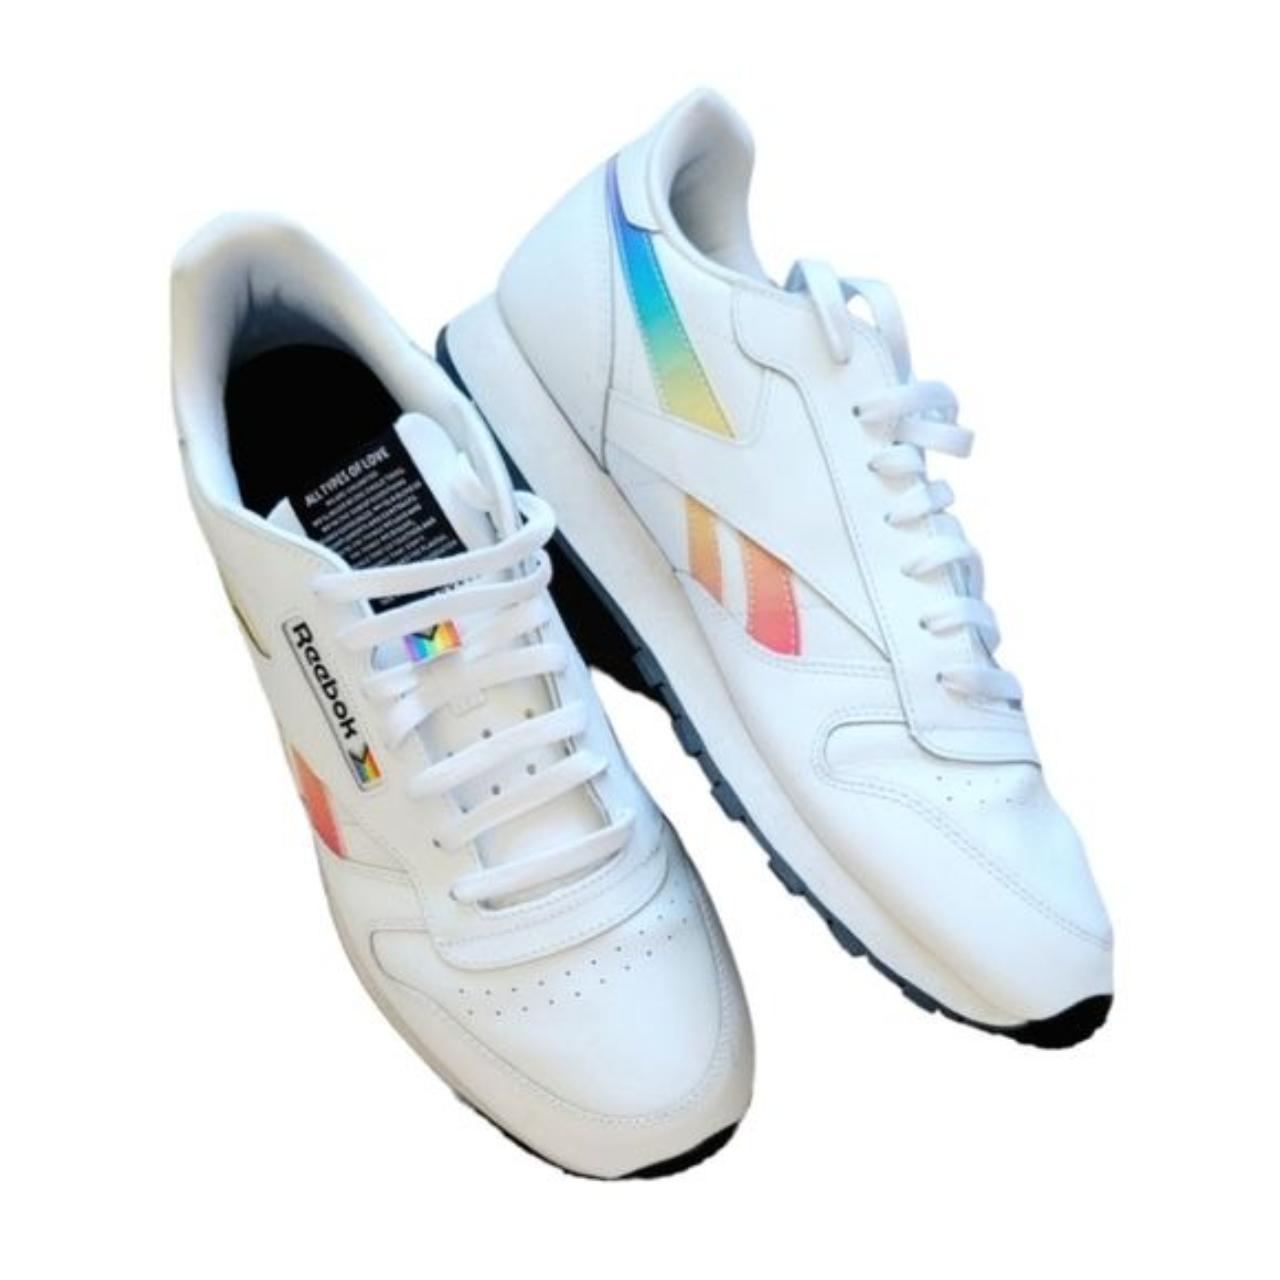 Reebok leather classic - pride... with sneakers Depop